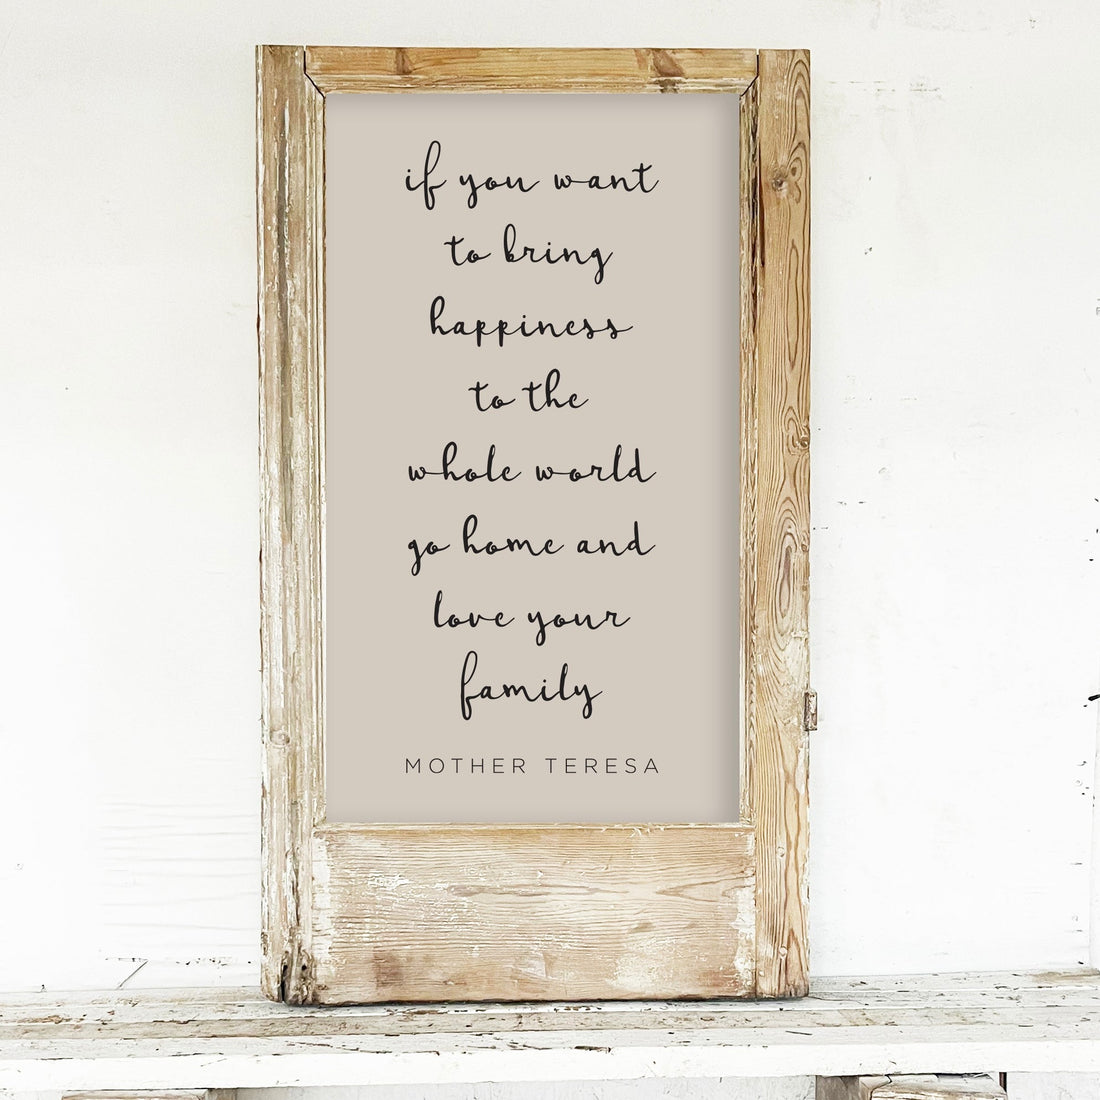 22x37.5 Mother Theresa Quote in European Door Base-Light Wood Sanded Wash